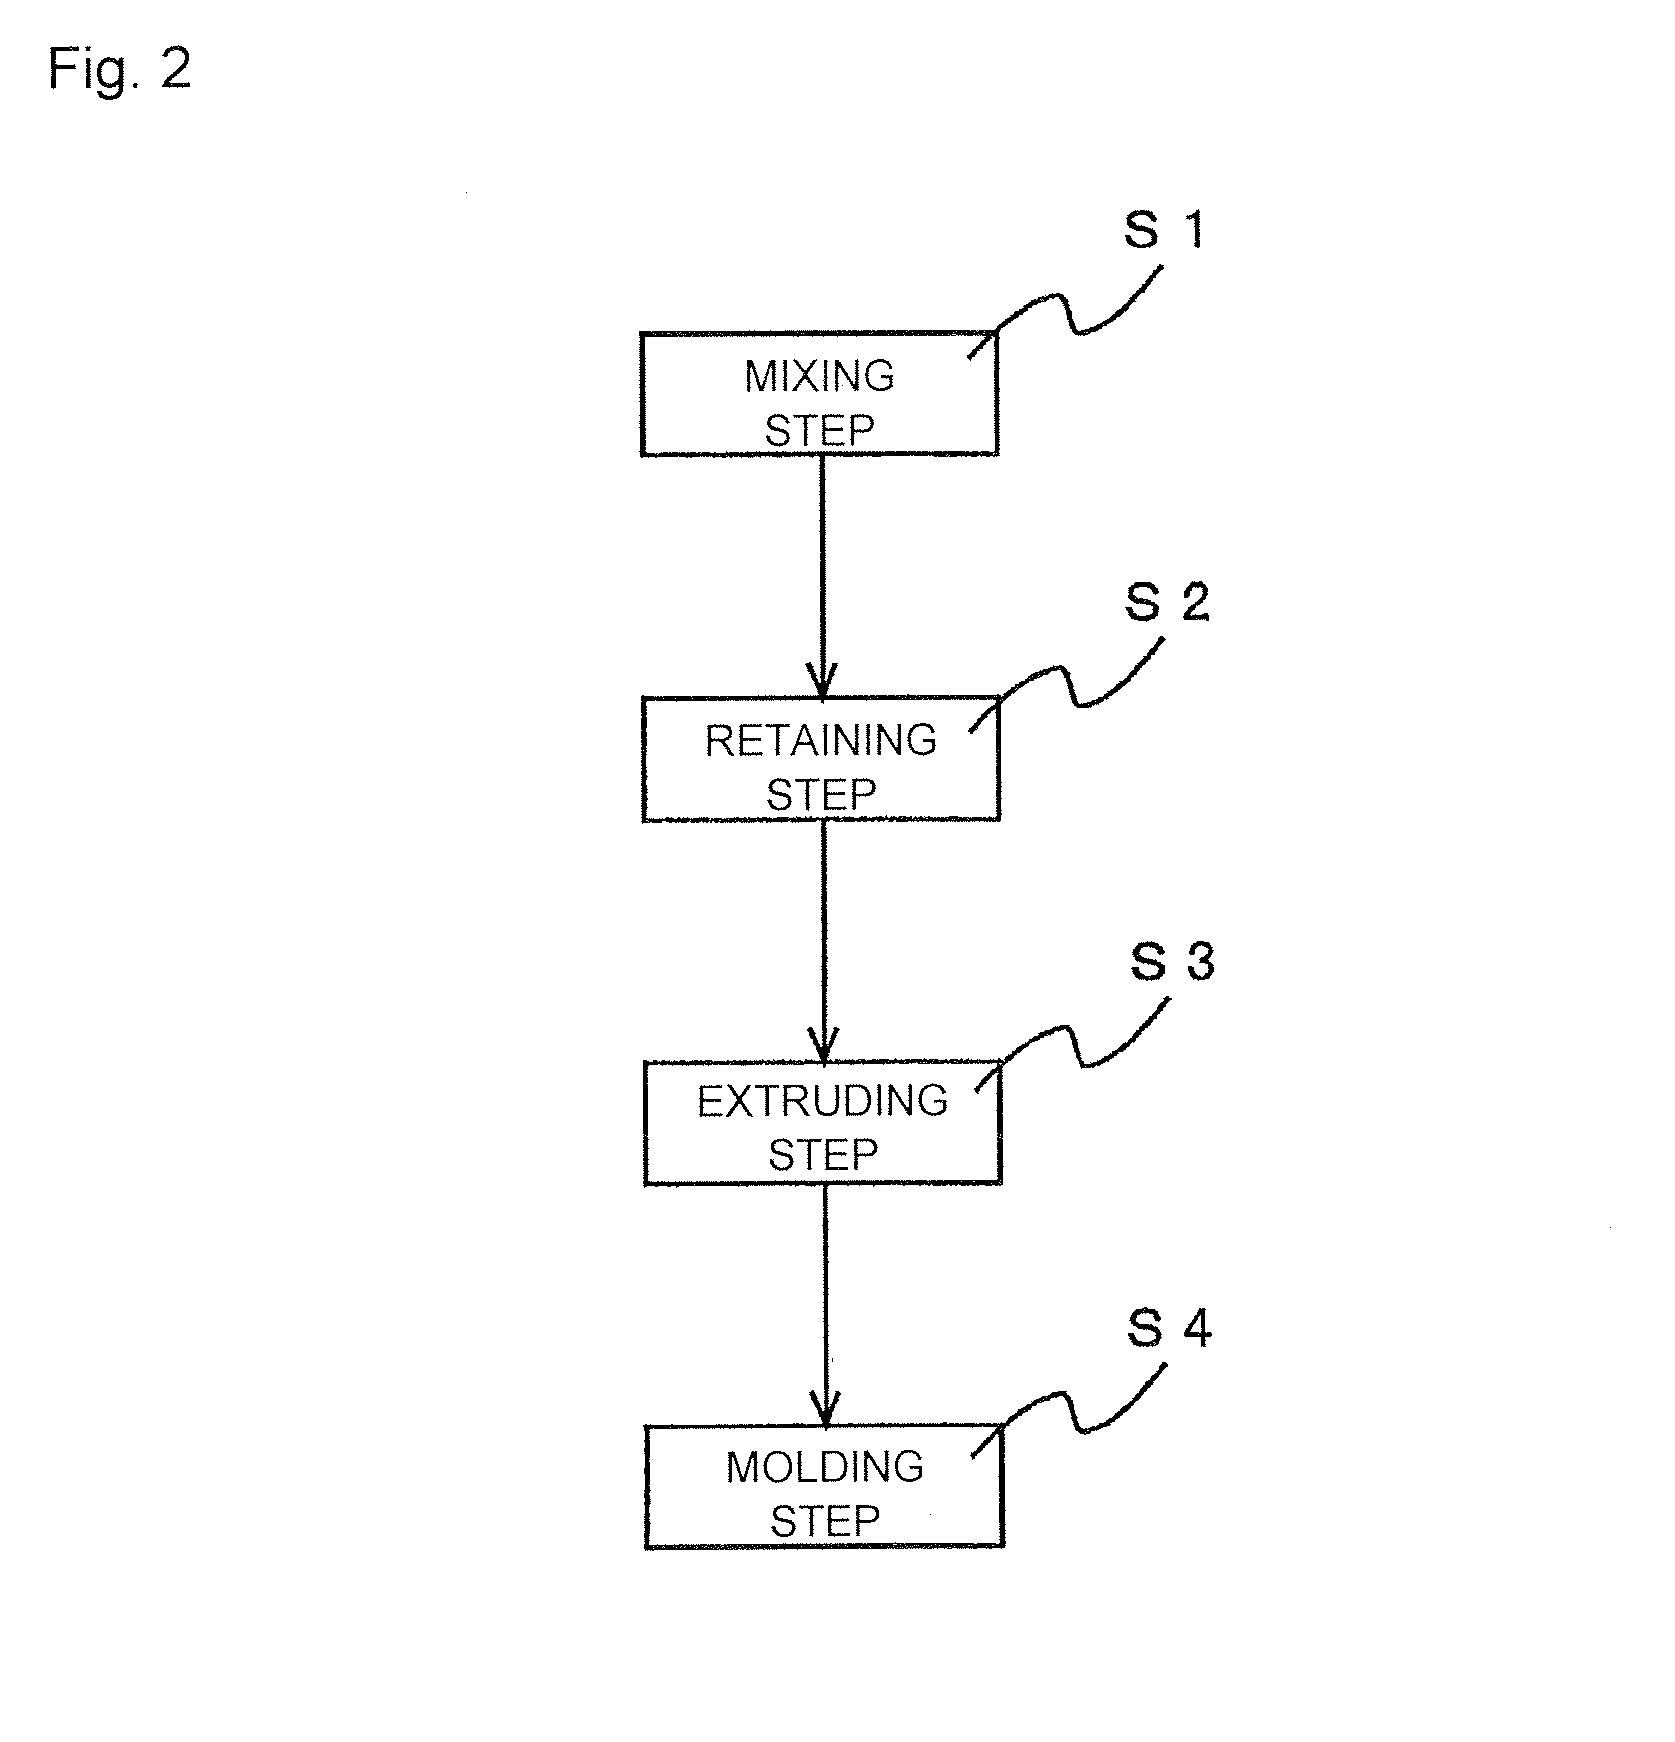 Blow-molded foam and process for producing the same